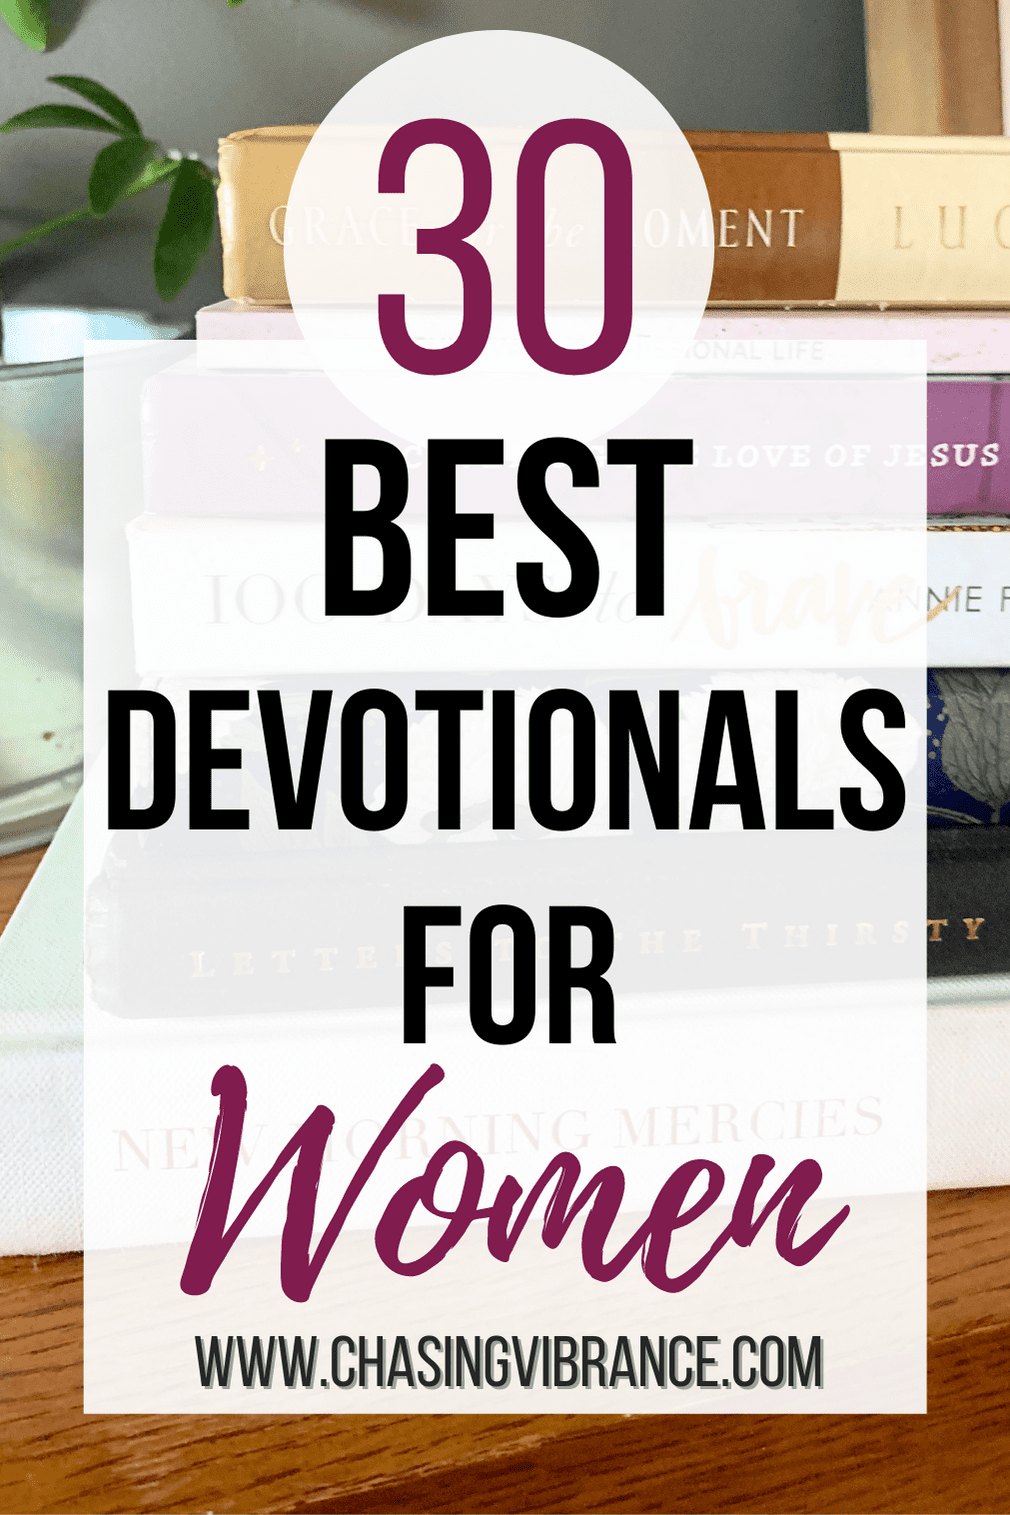 Stack of devotional books on a piano with large text overlay 30 Best devotionals for women